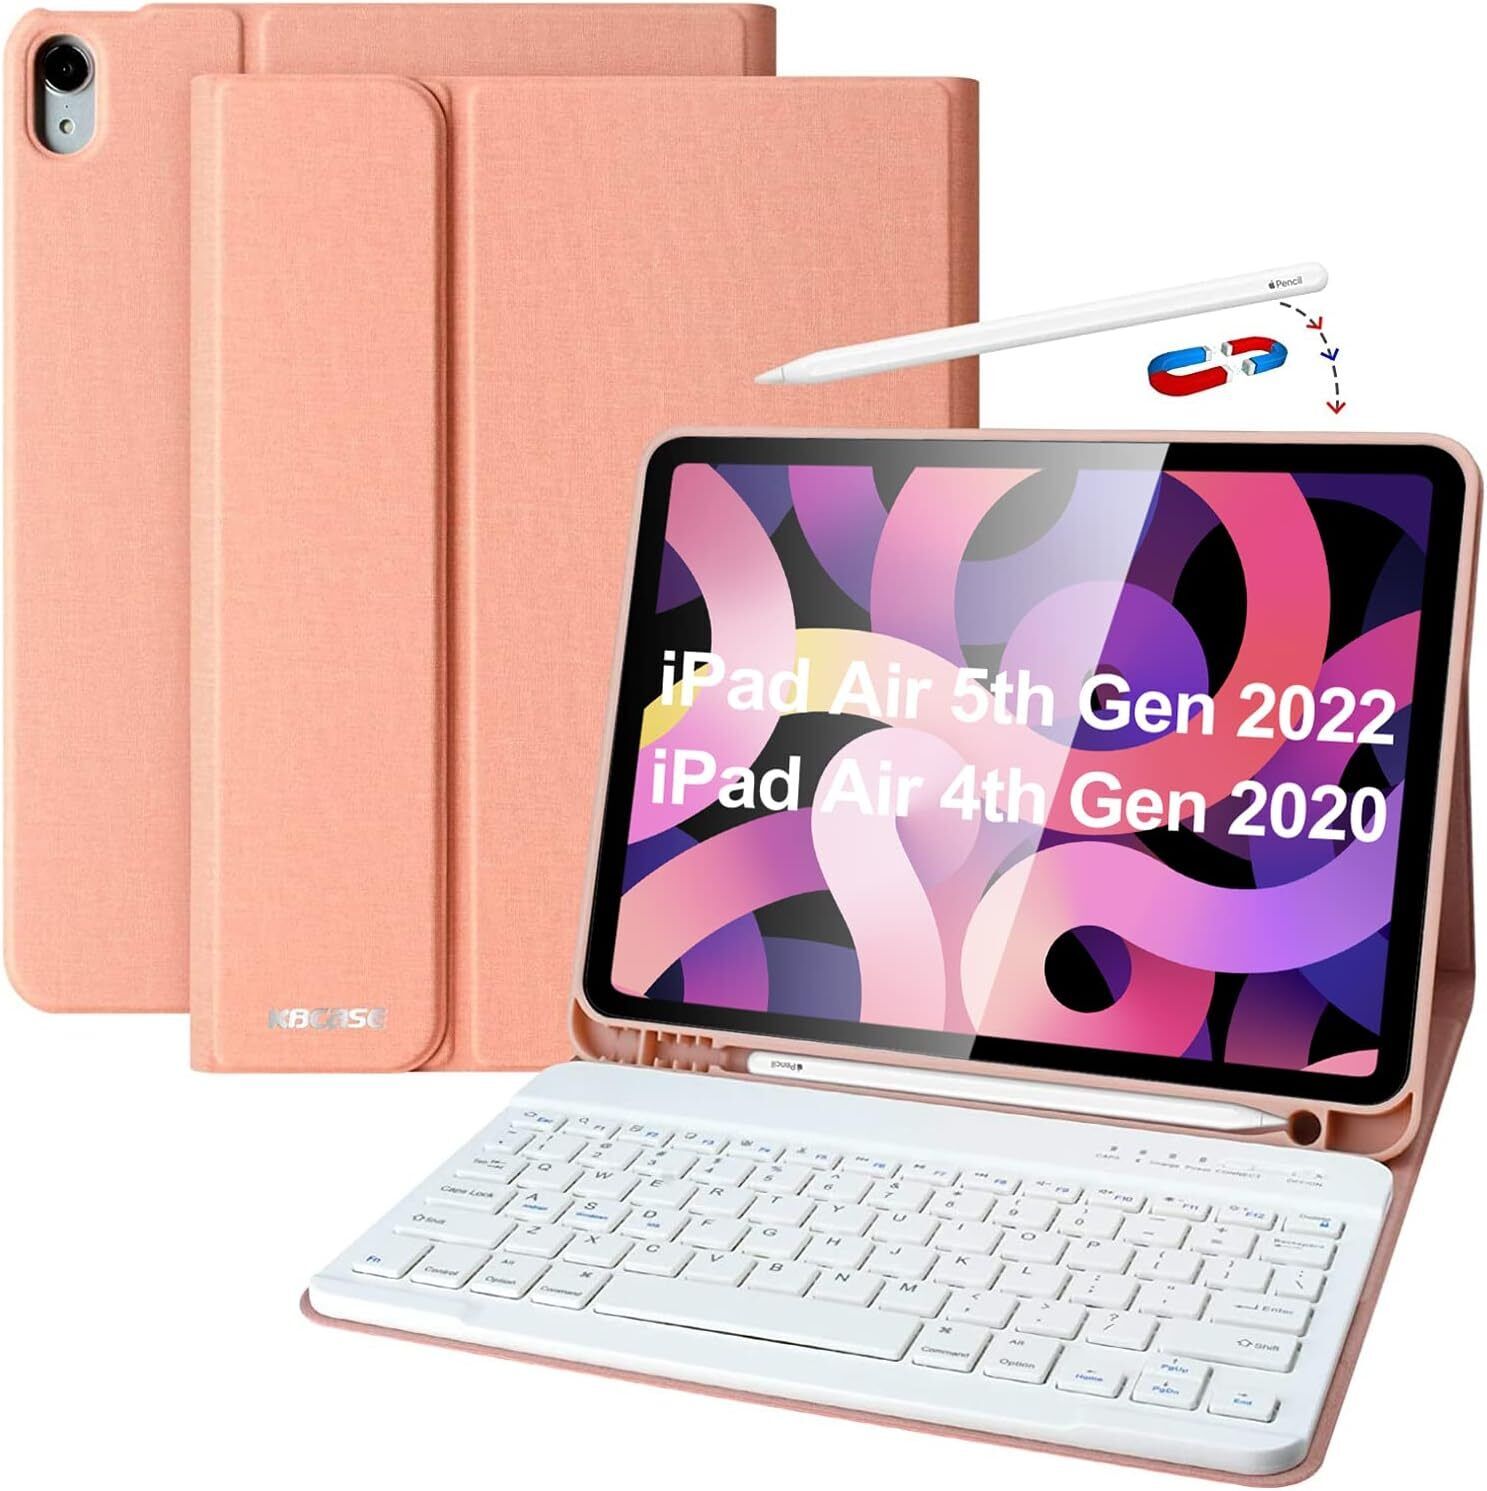 Bluetooth Keyboard Case For iPad Air 5th Gen 10.9'' 2022 Soft TPU Cover Stand